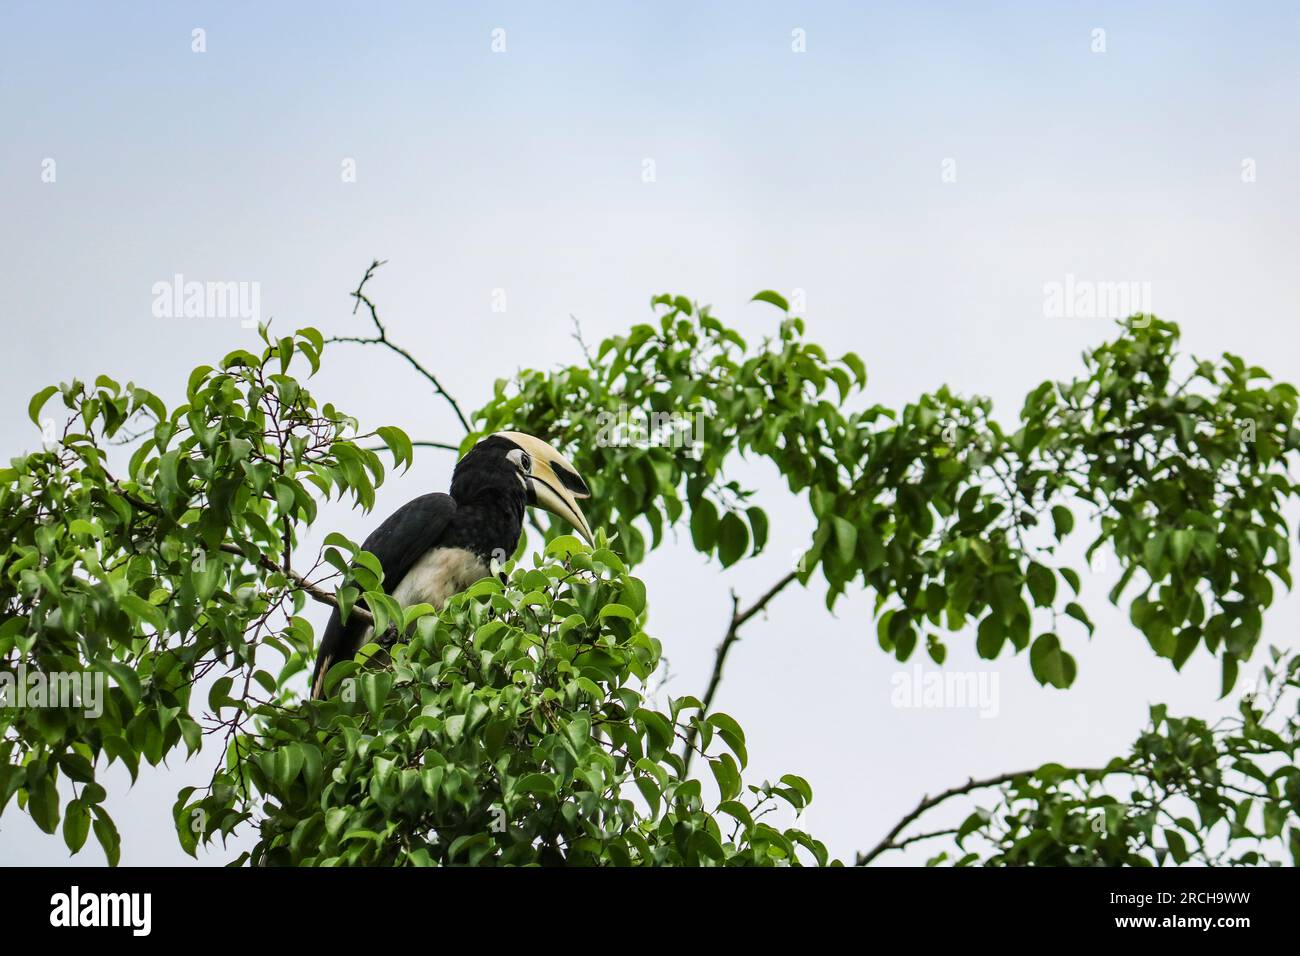 The oriental pied hornbill (Anthracoceros albirostris) sits on top of a tree. Selective focus on the bird. Stock Photo